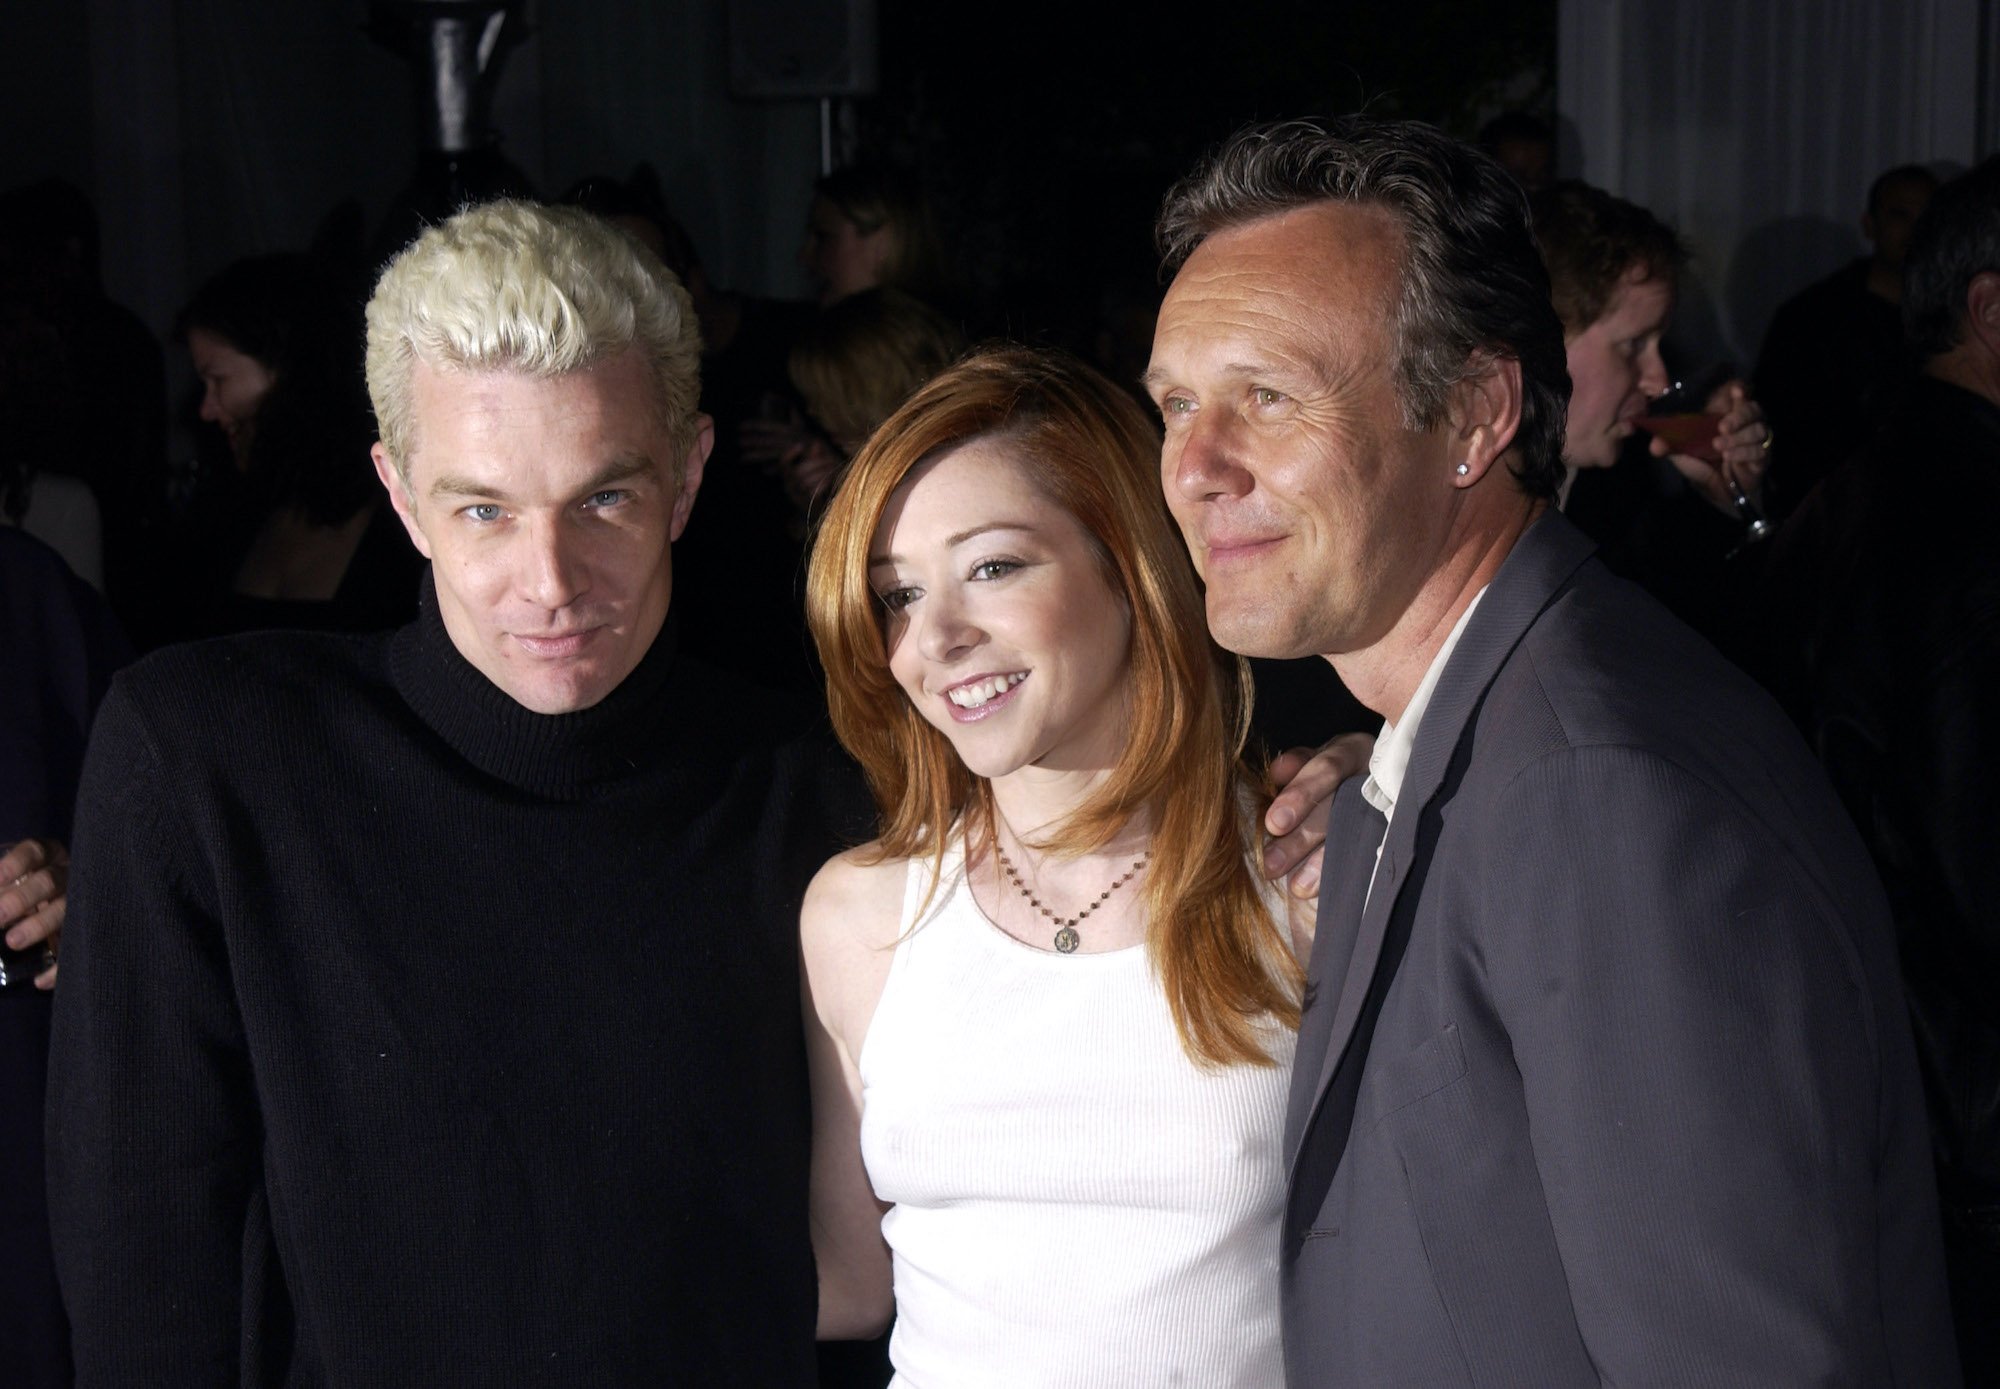 James Marsters (L), Alyson Hannigan, and Anthony Stewart Head at the 'Buffy the Vampire Slayer' wrap party